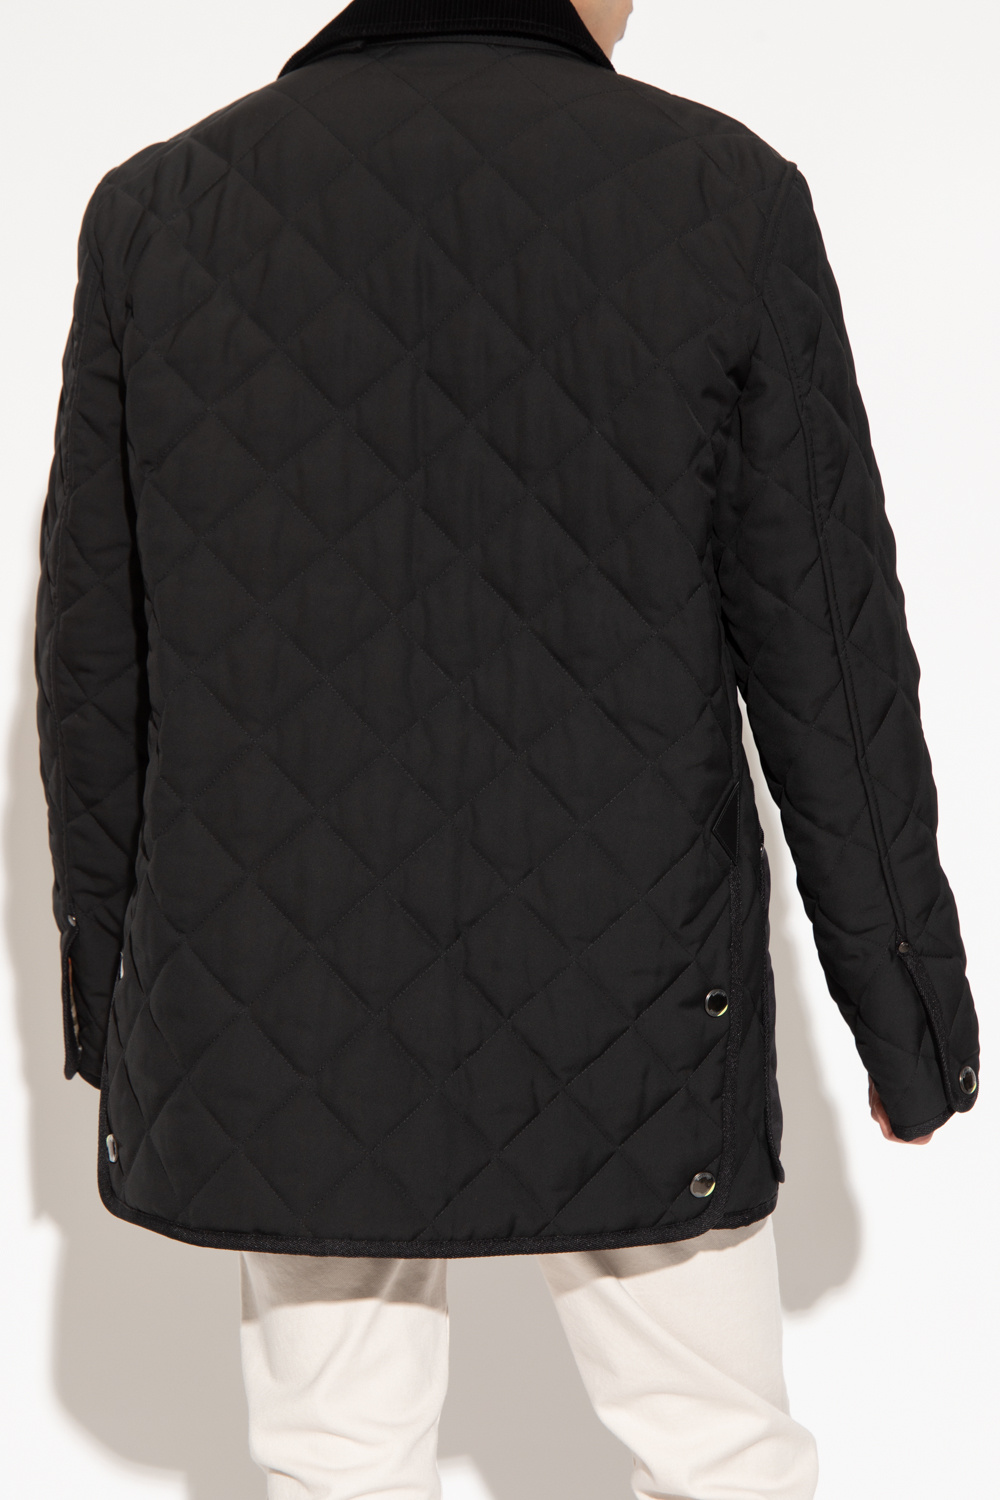 Burberry ‘Lanford’ insulated jacket